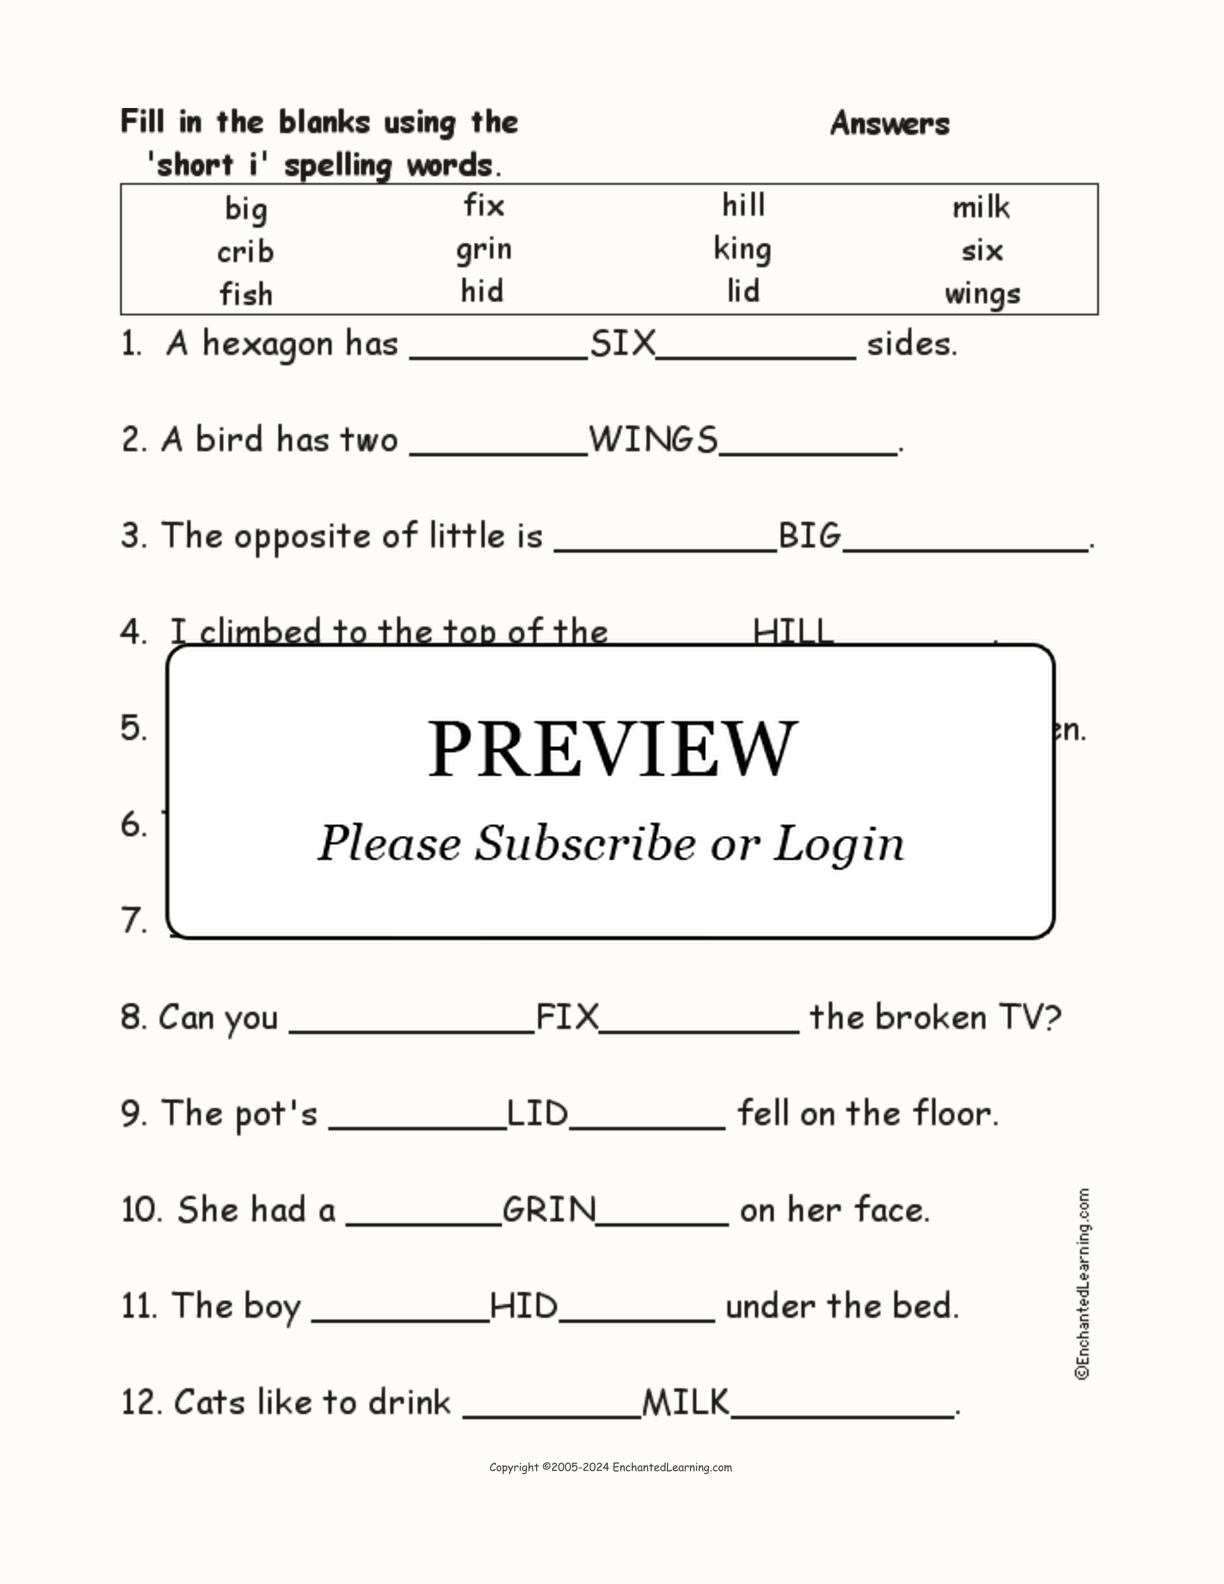 Short I: Spelling Word Questions interactive worksheet page 2